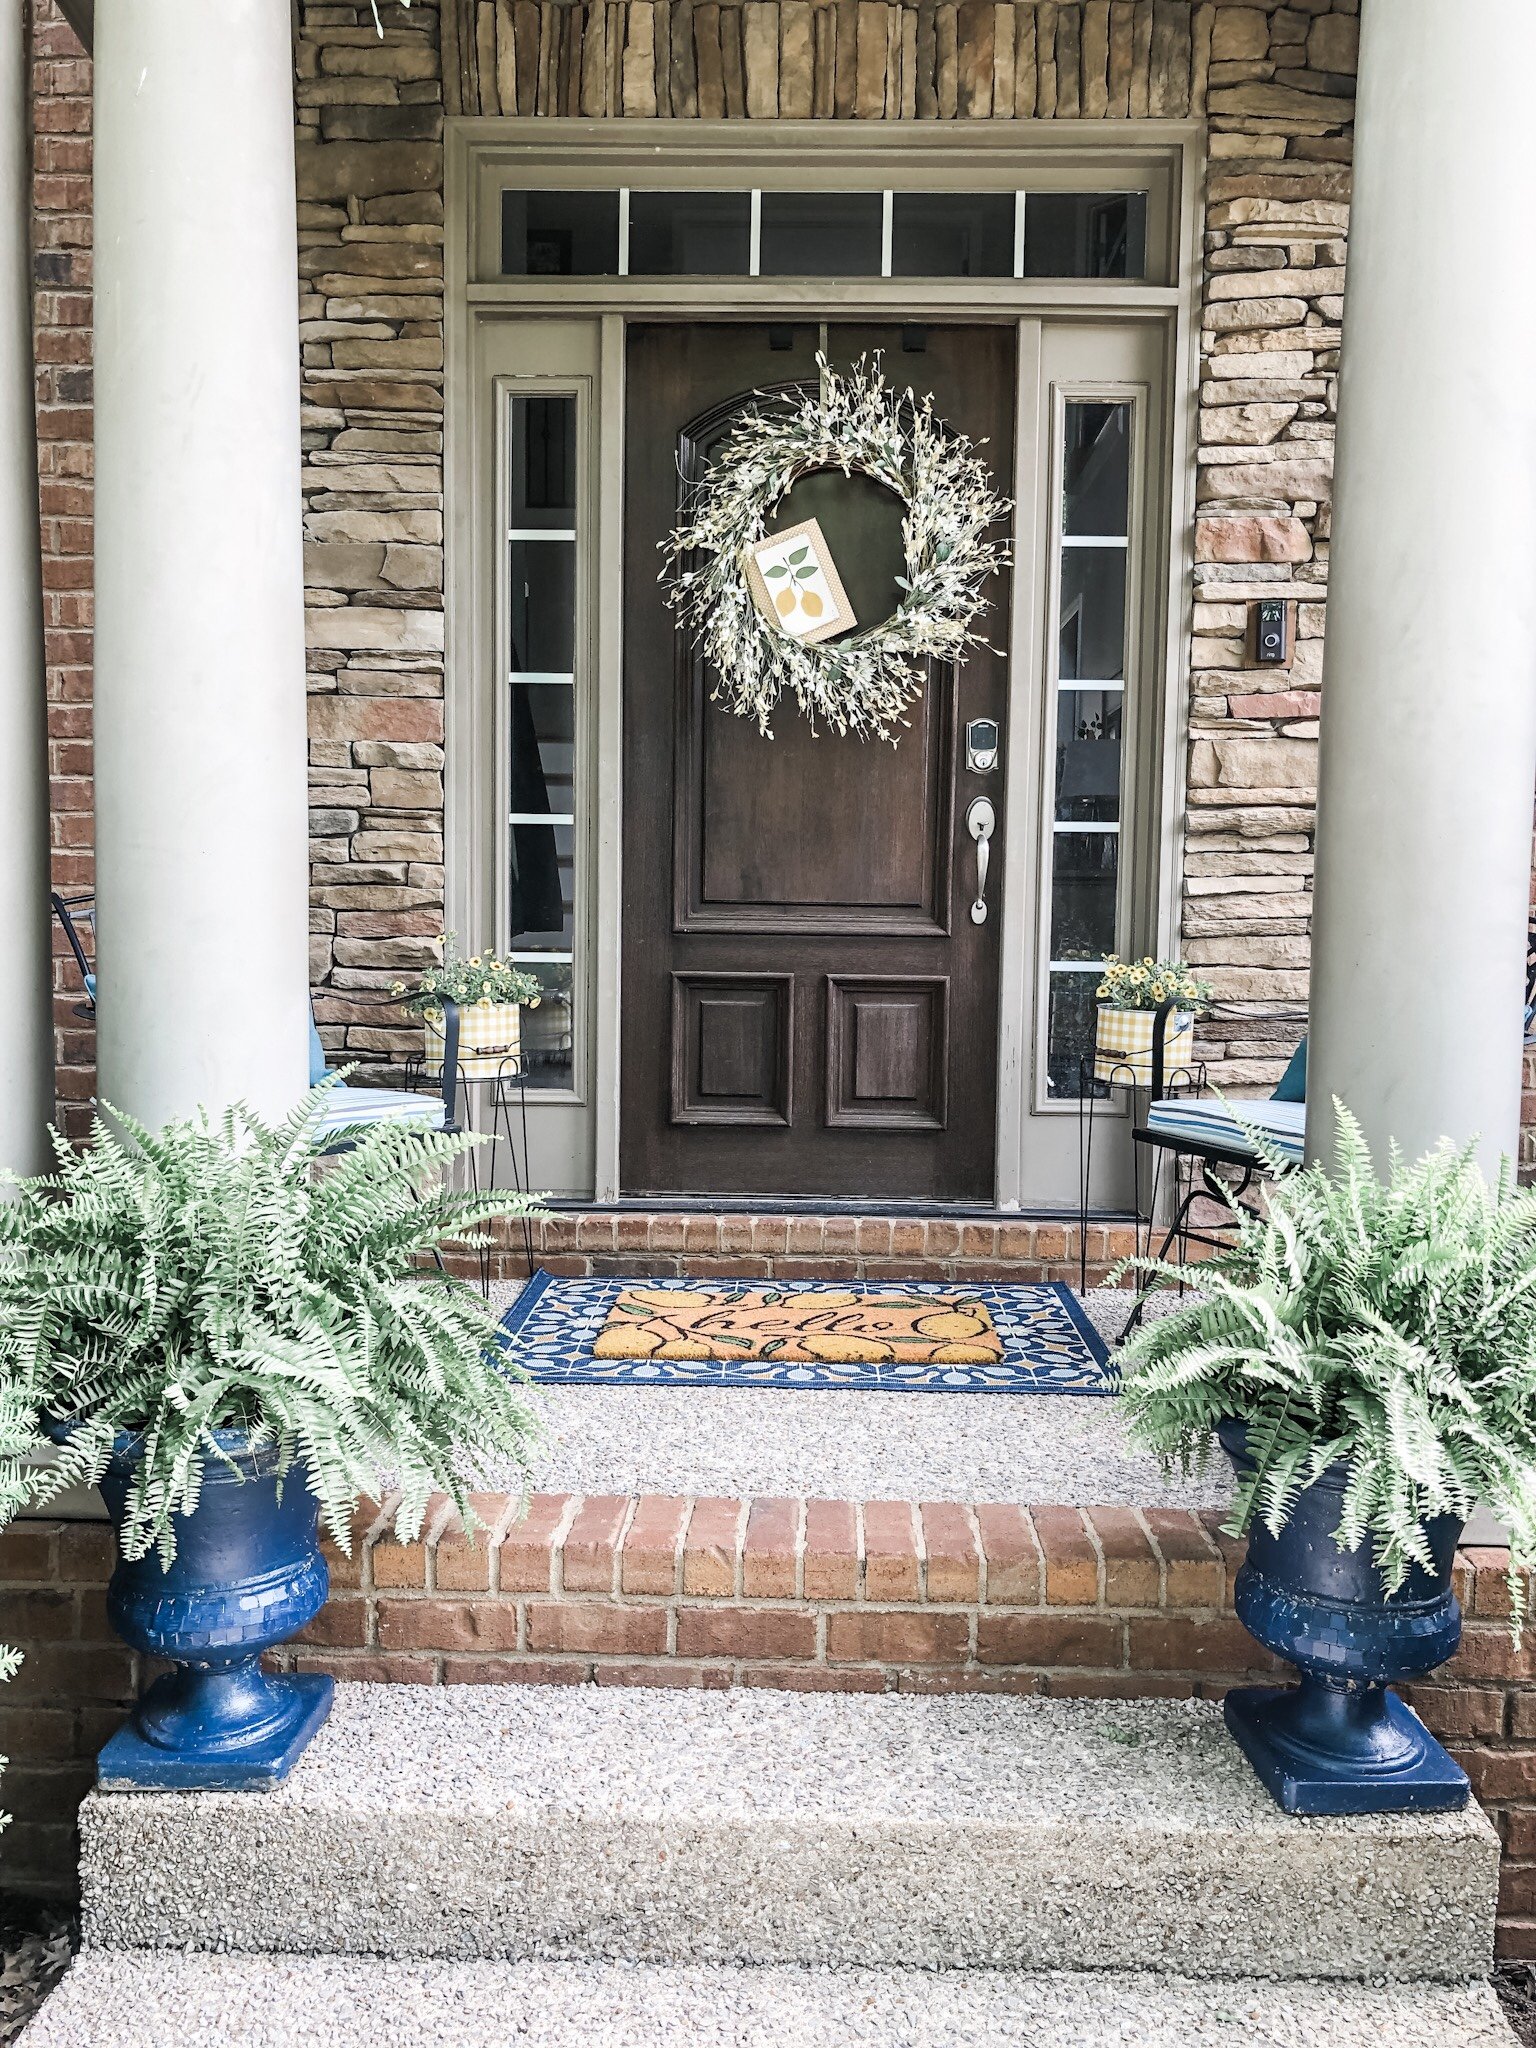 https://www.wilshirecollections.com/wp-content/uploads/2019/05/Small-front-porch-ideas-for-Spring-and-Summer-with-3-easy-tips.jpg